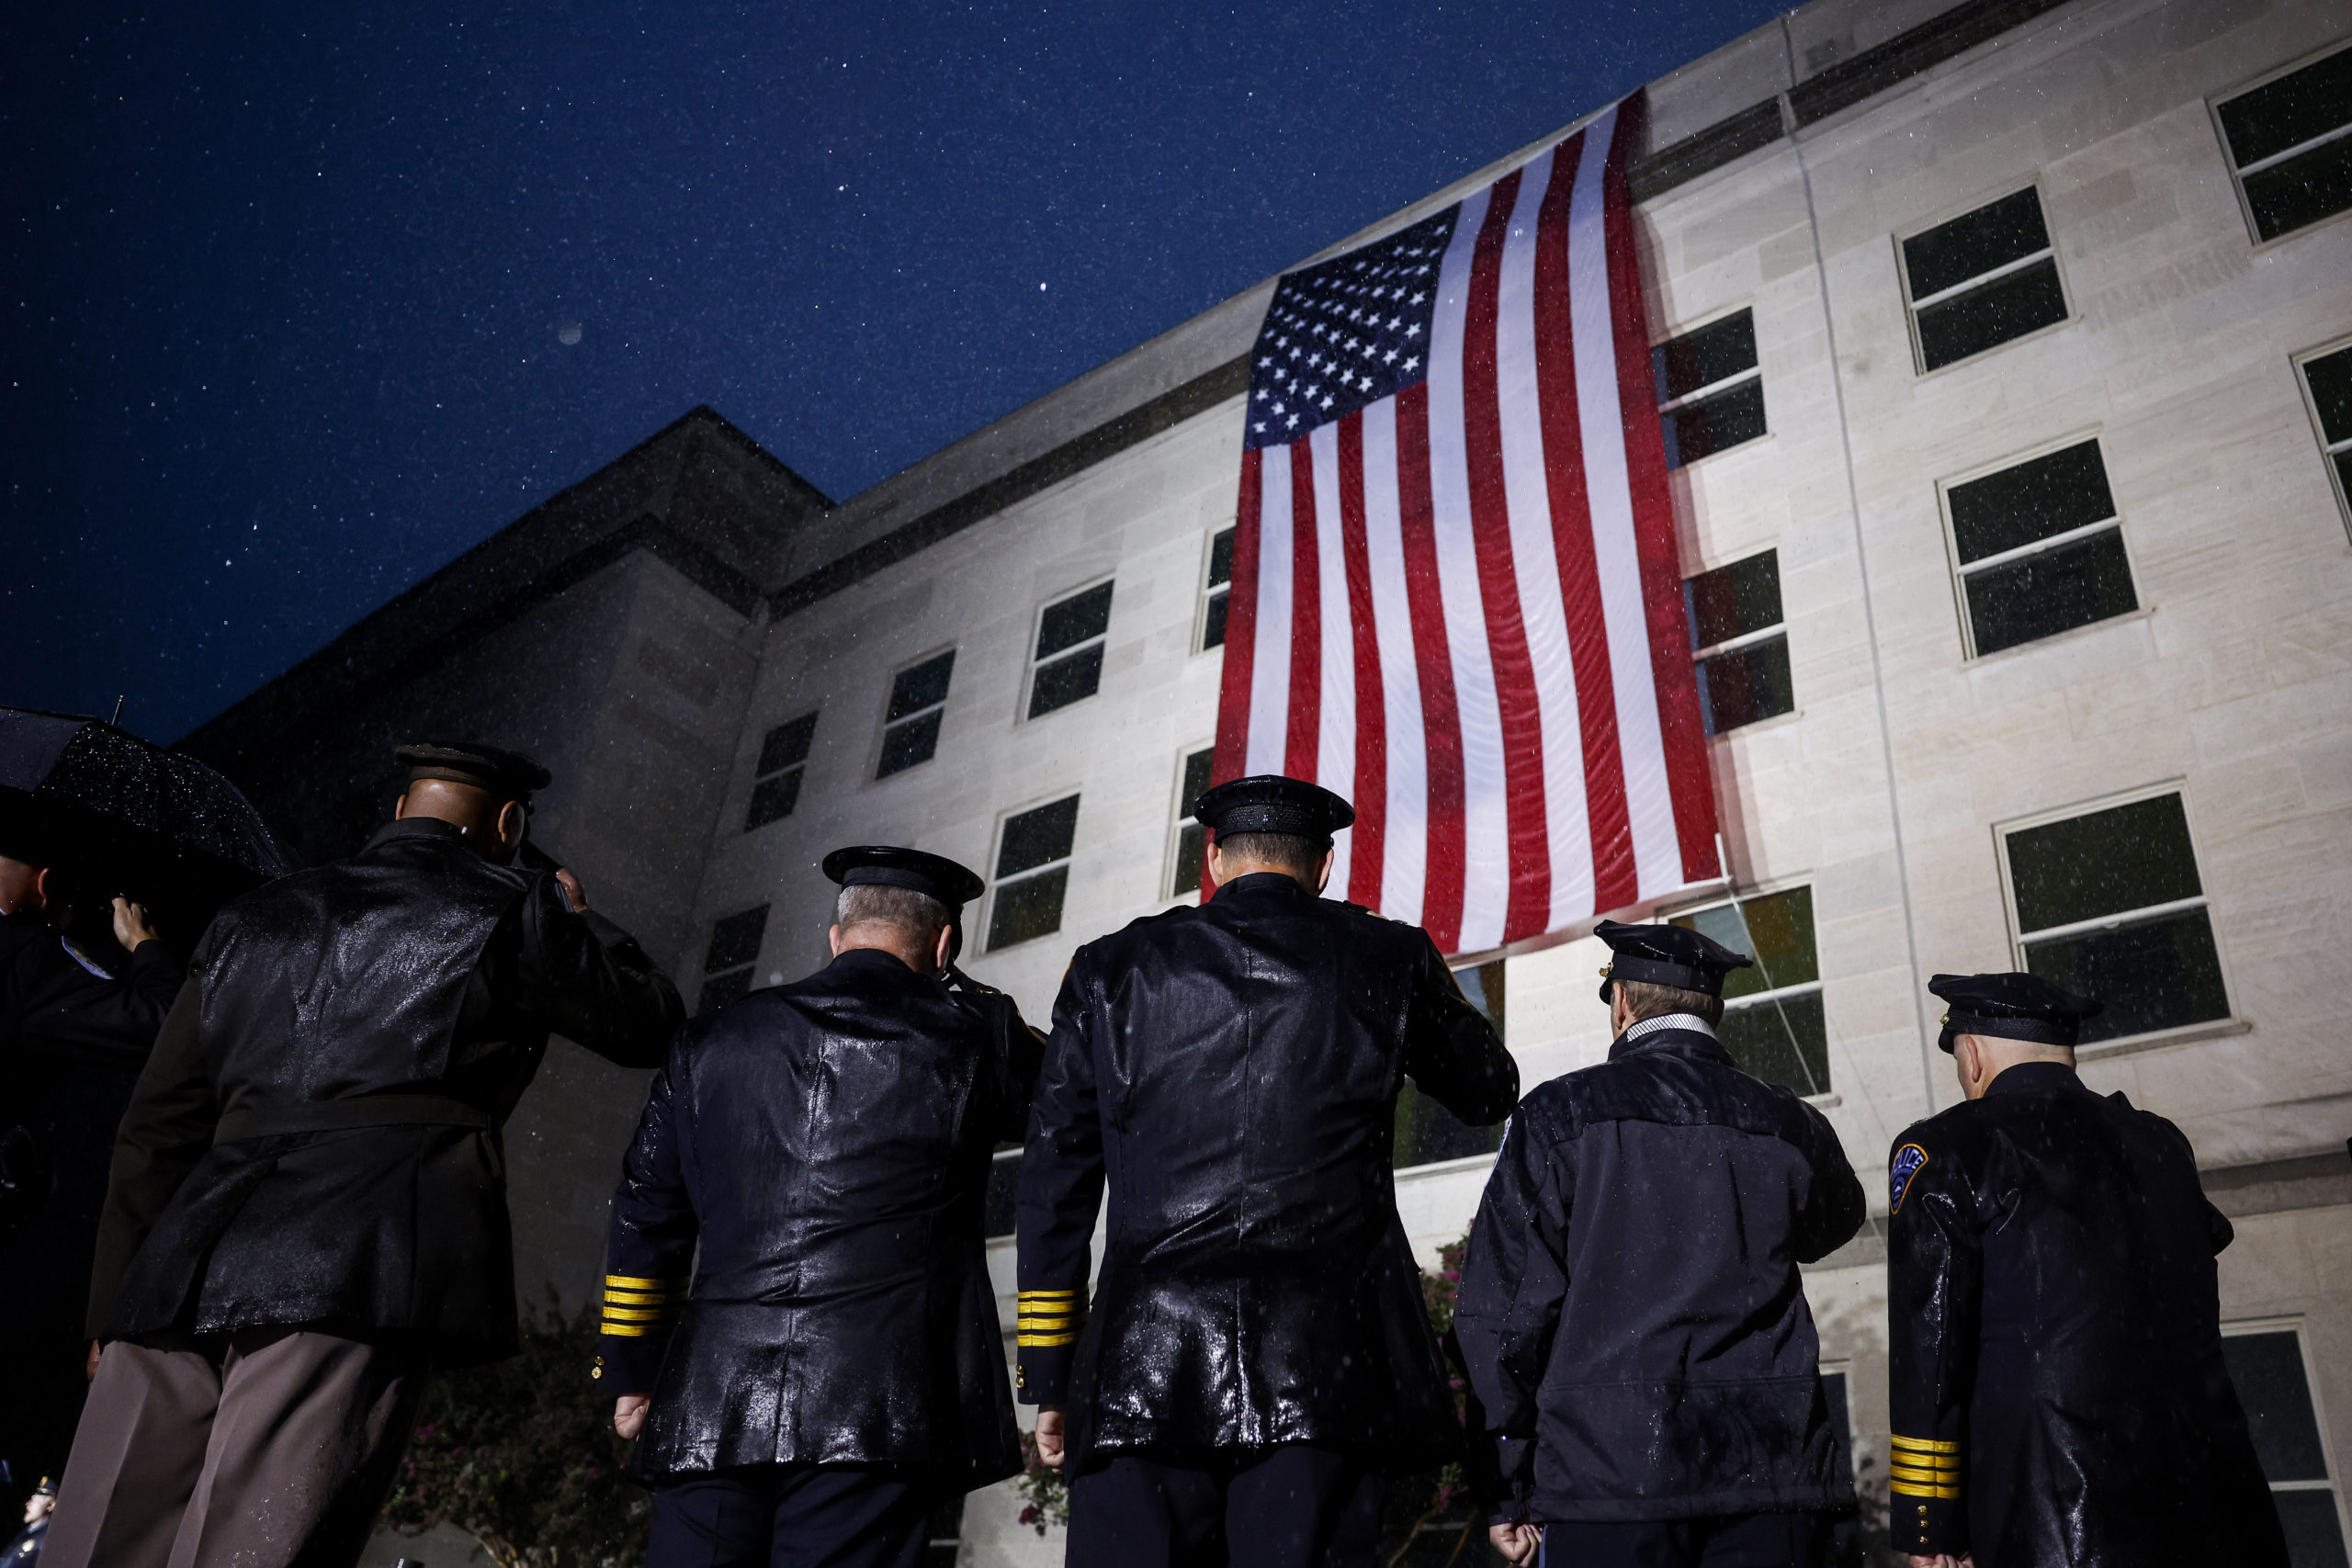 Members of the military and first responders stand in salute as an American flag is unfurled on the side of the Pentagon to commemorate the 21st anniversary of the 9/11 terror attacks on September 11, 2022 in Arlington, Virginia. Later today U.S. President Joe Biden will visit the Pentagon to participate in a wreath laying ceremony and give remarks to honor and remember the victims of the September 11th terror attack. (Photo by Anna Moneymaker/Getty Images)